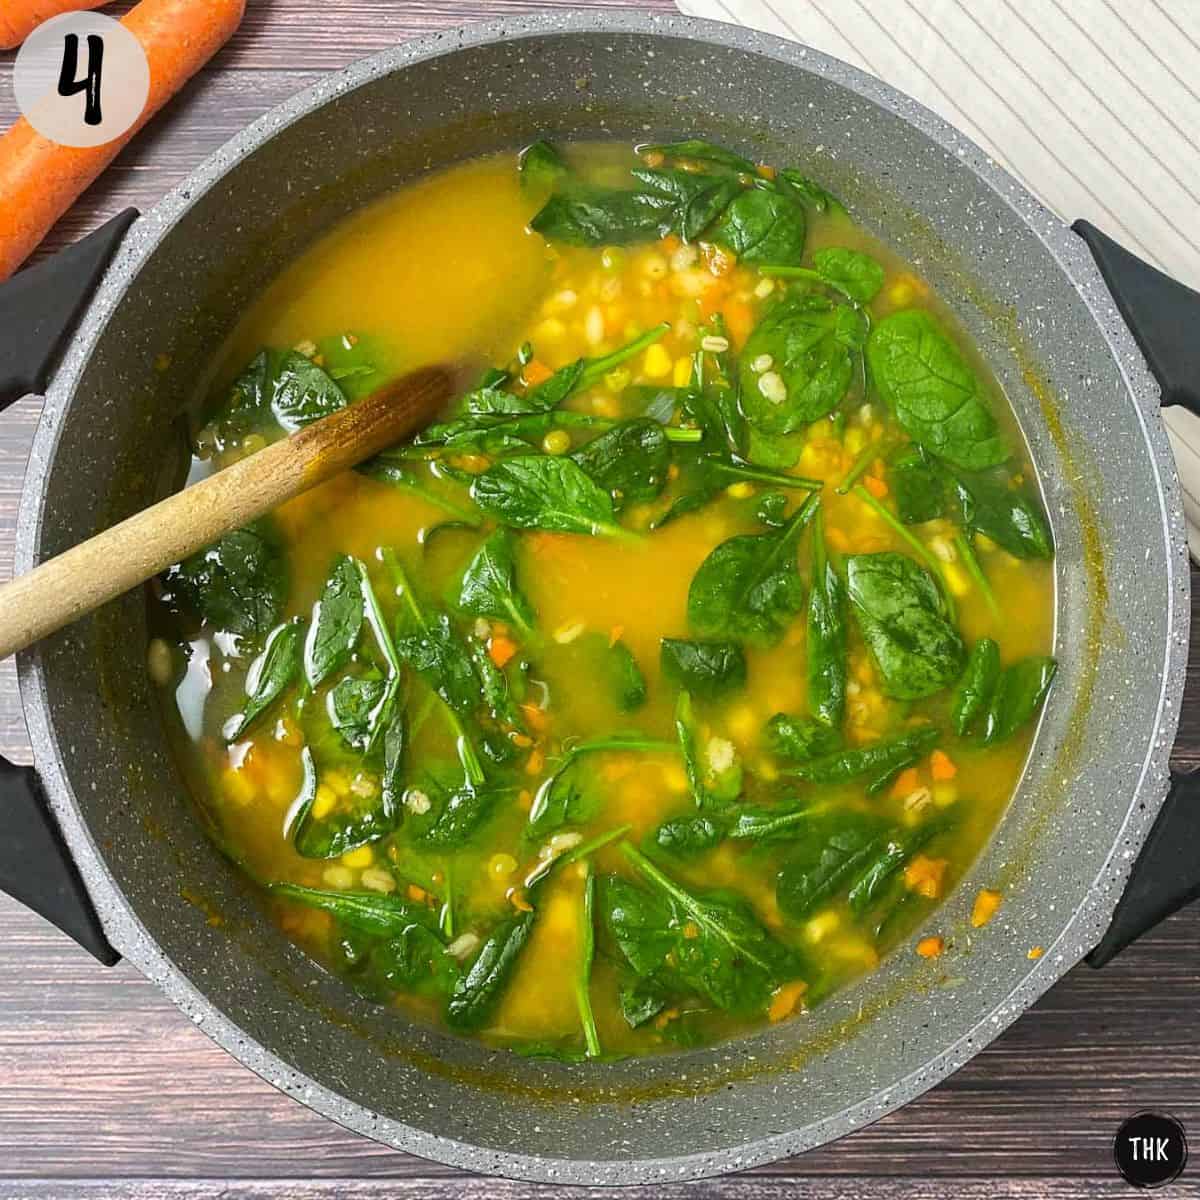 Pot of soup with wilted spinach inside.